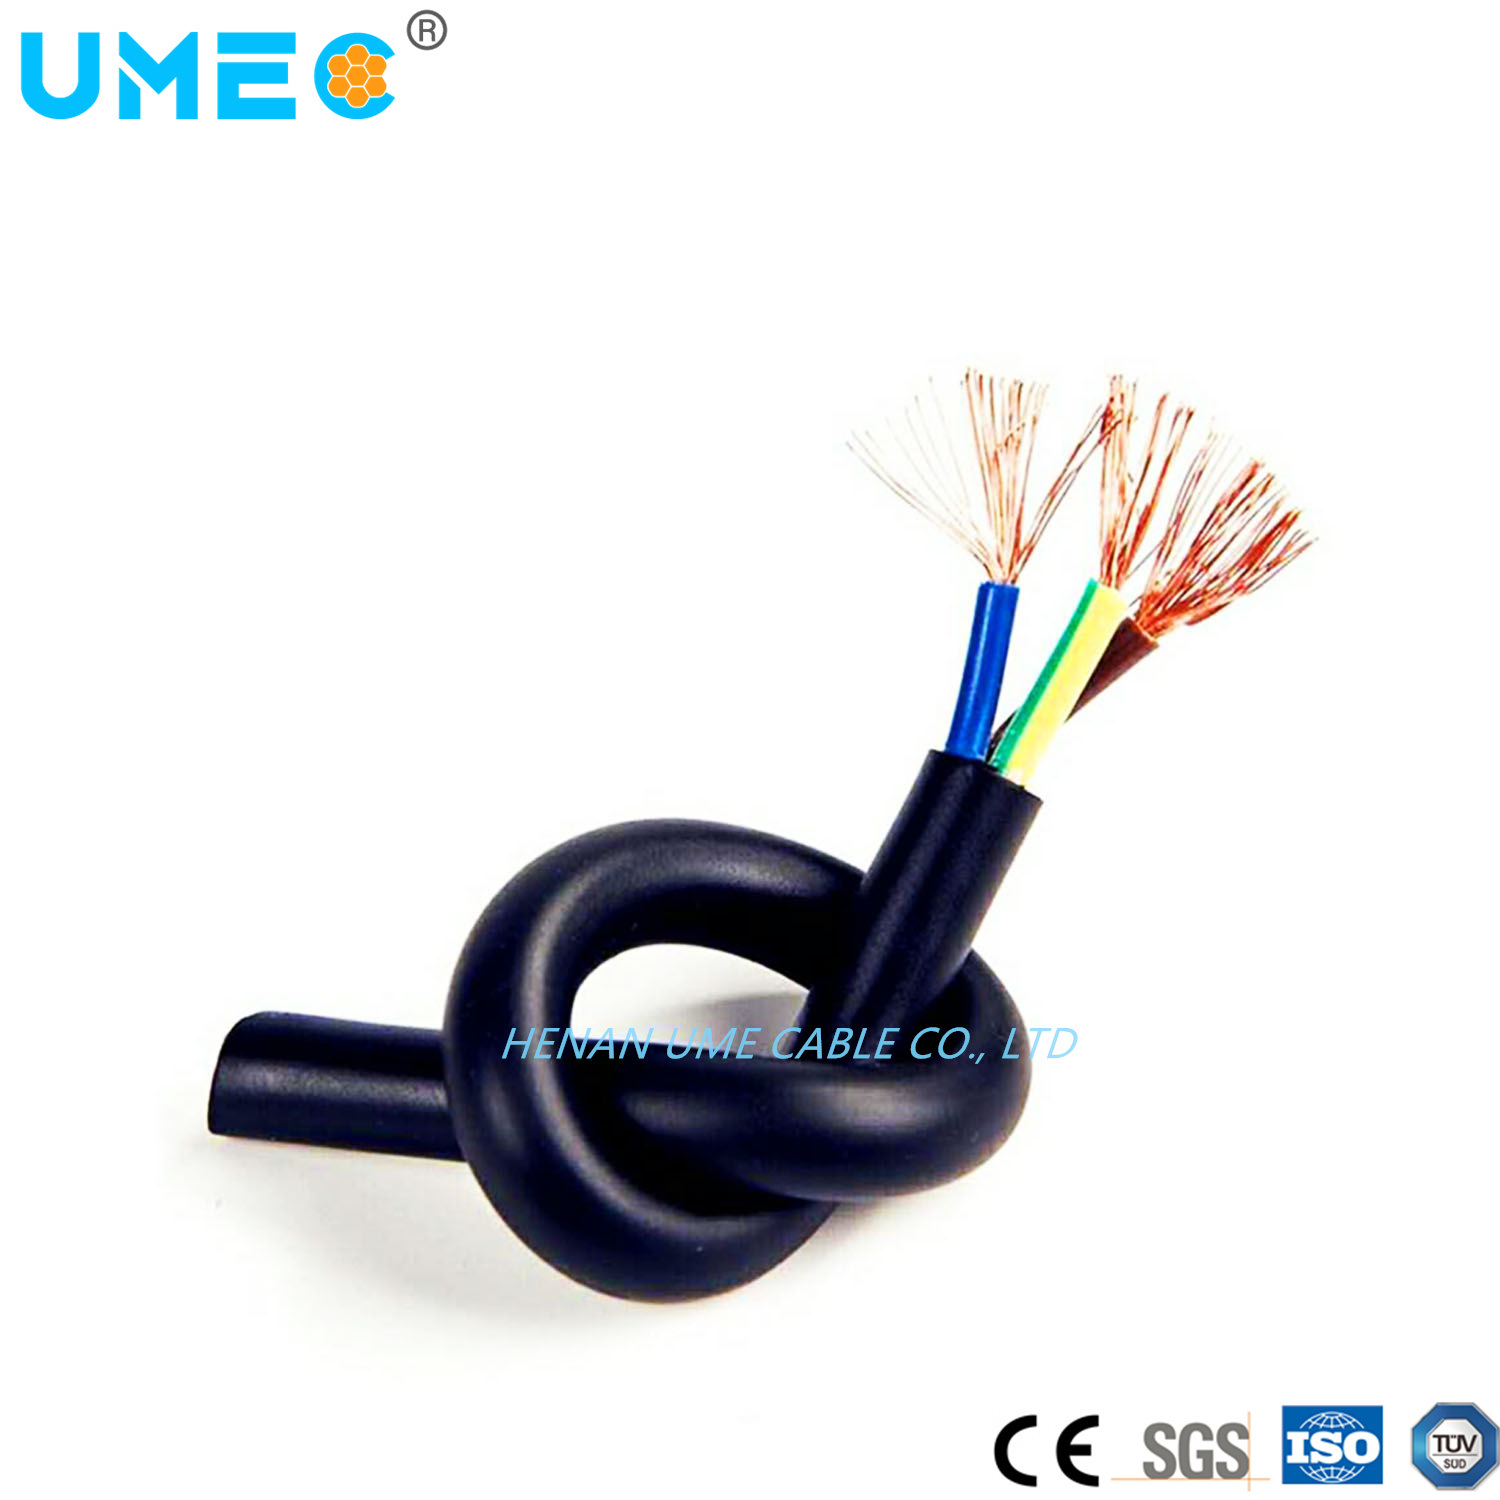 IEC245-23 IEC245-26 300/300V (YZ type) 300/500 450/750V (YC type) H07rn-F H07rrf3 Rubber Cable